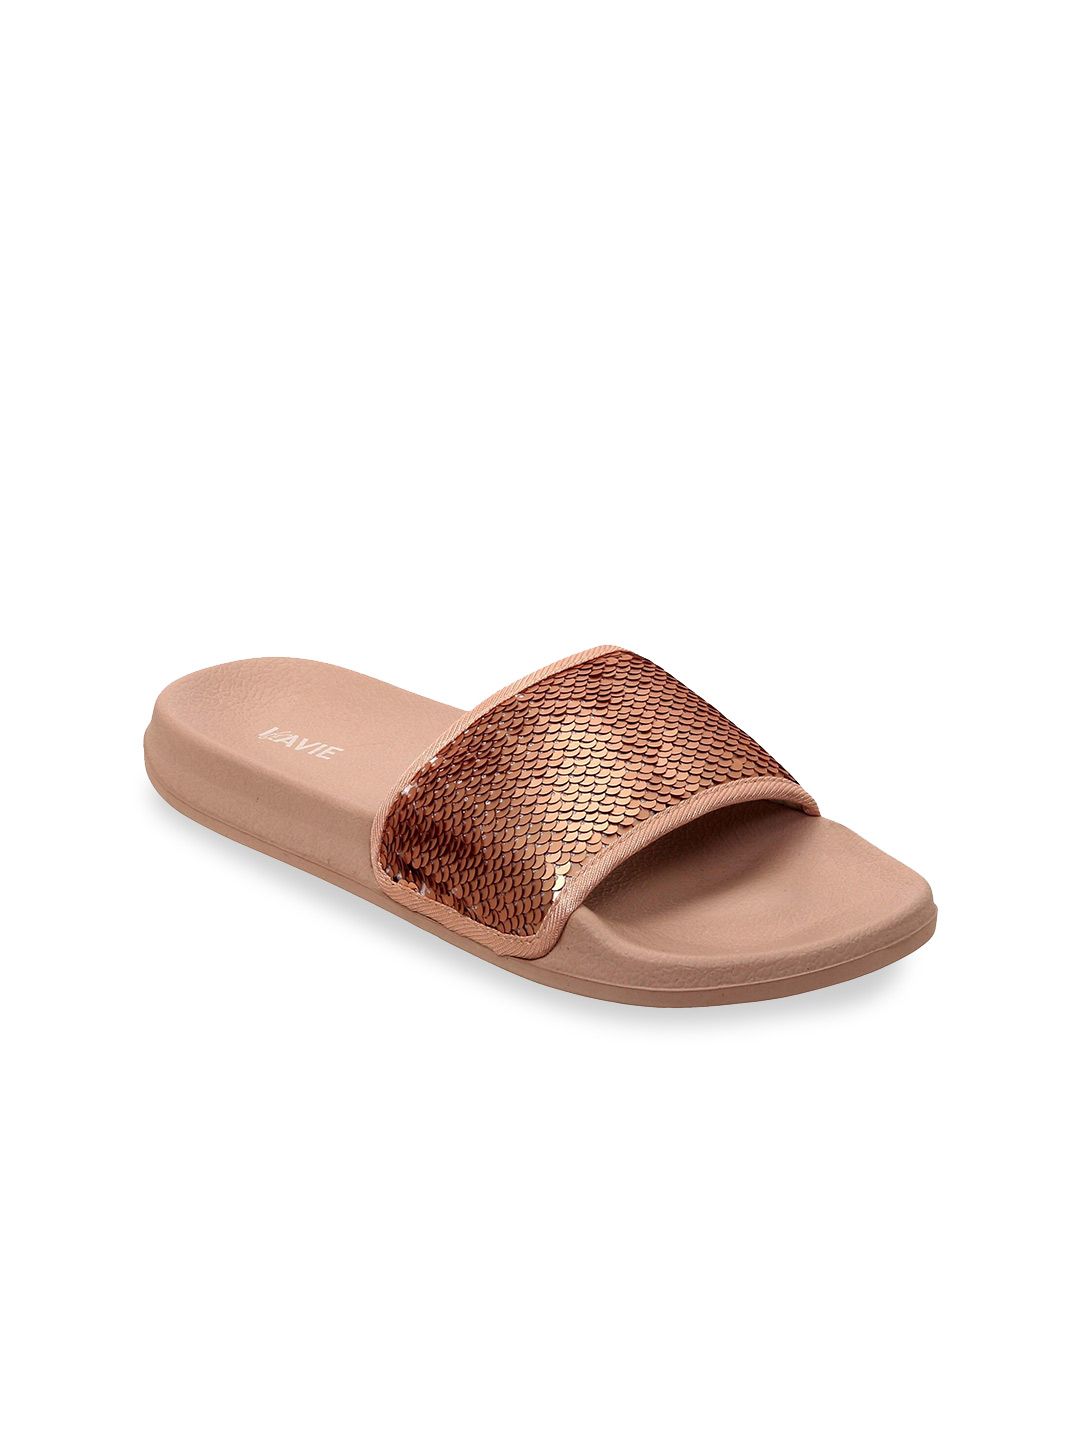 Lavie Women Rose Gold Embellished Sliders Price in India